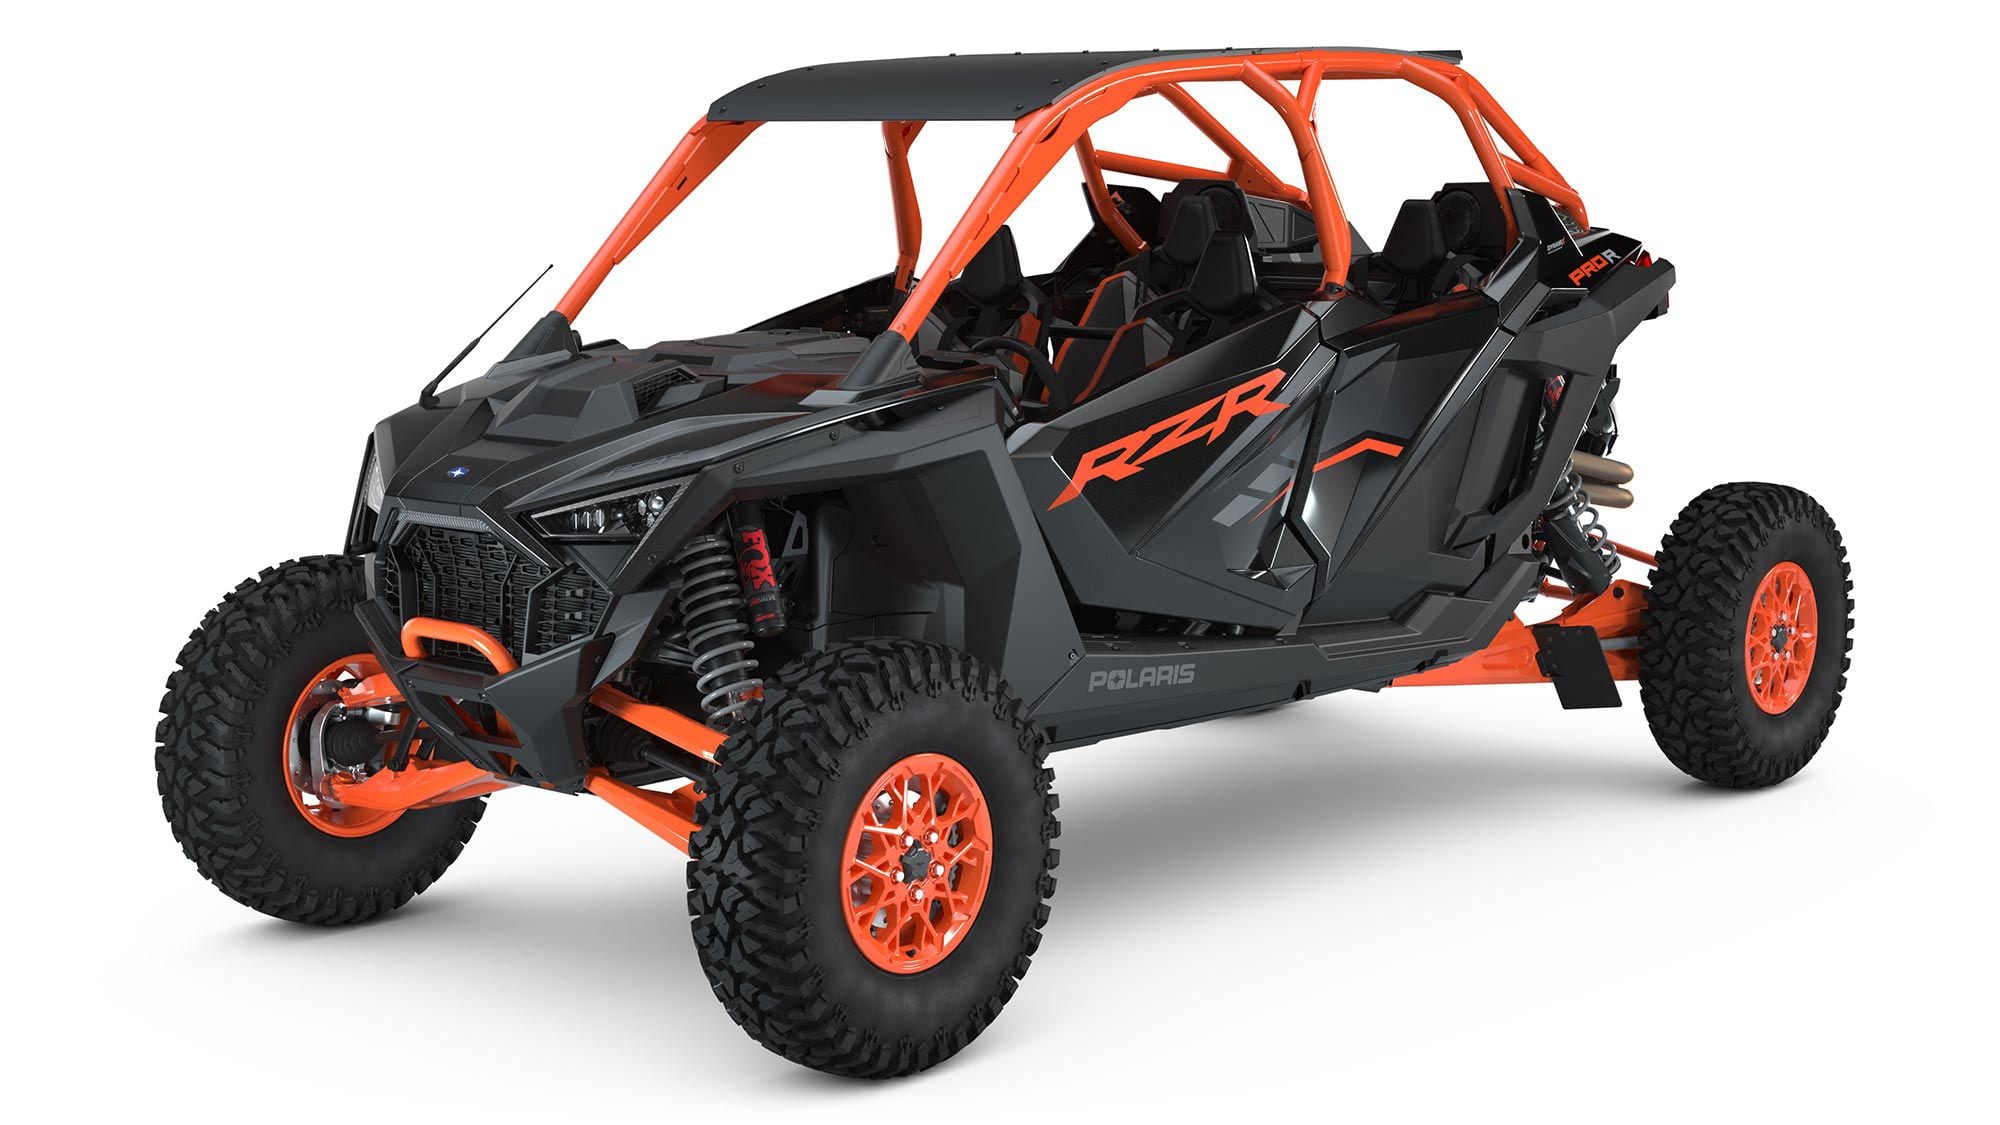 The 2022 Polaris RZR Pro R 4 Ultimate Launch Edition in Indy Red and Onyx Black.